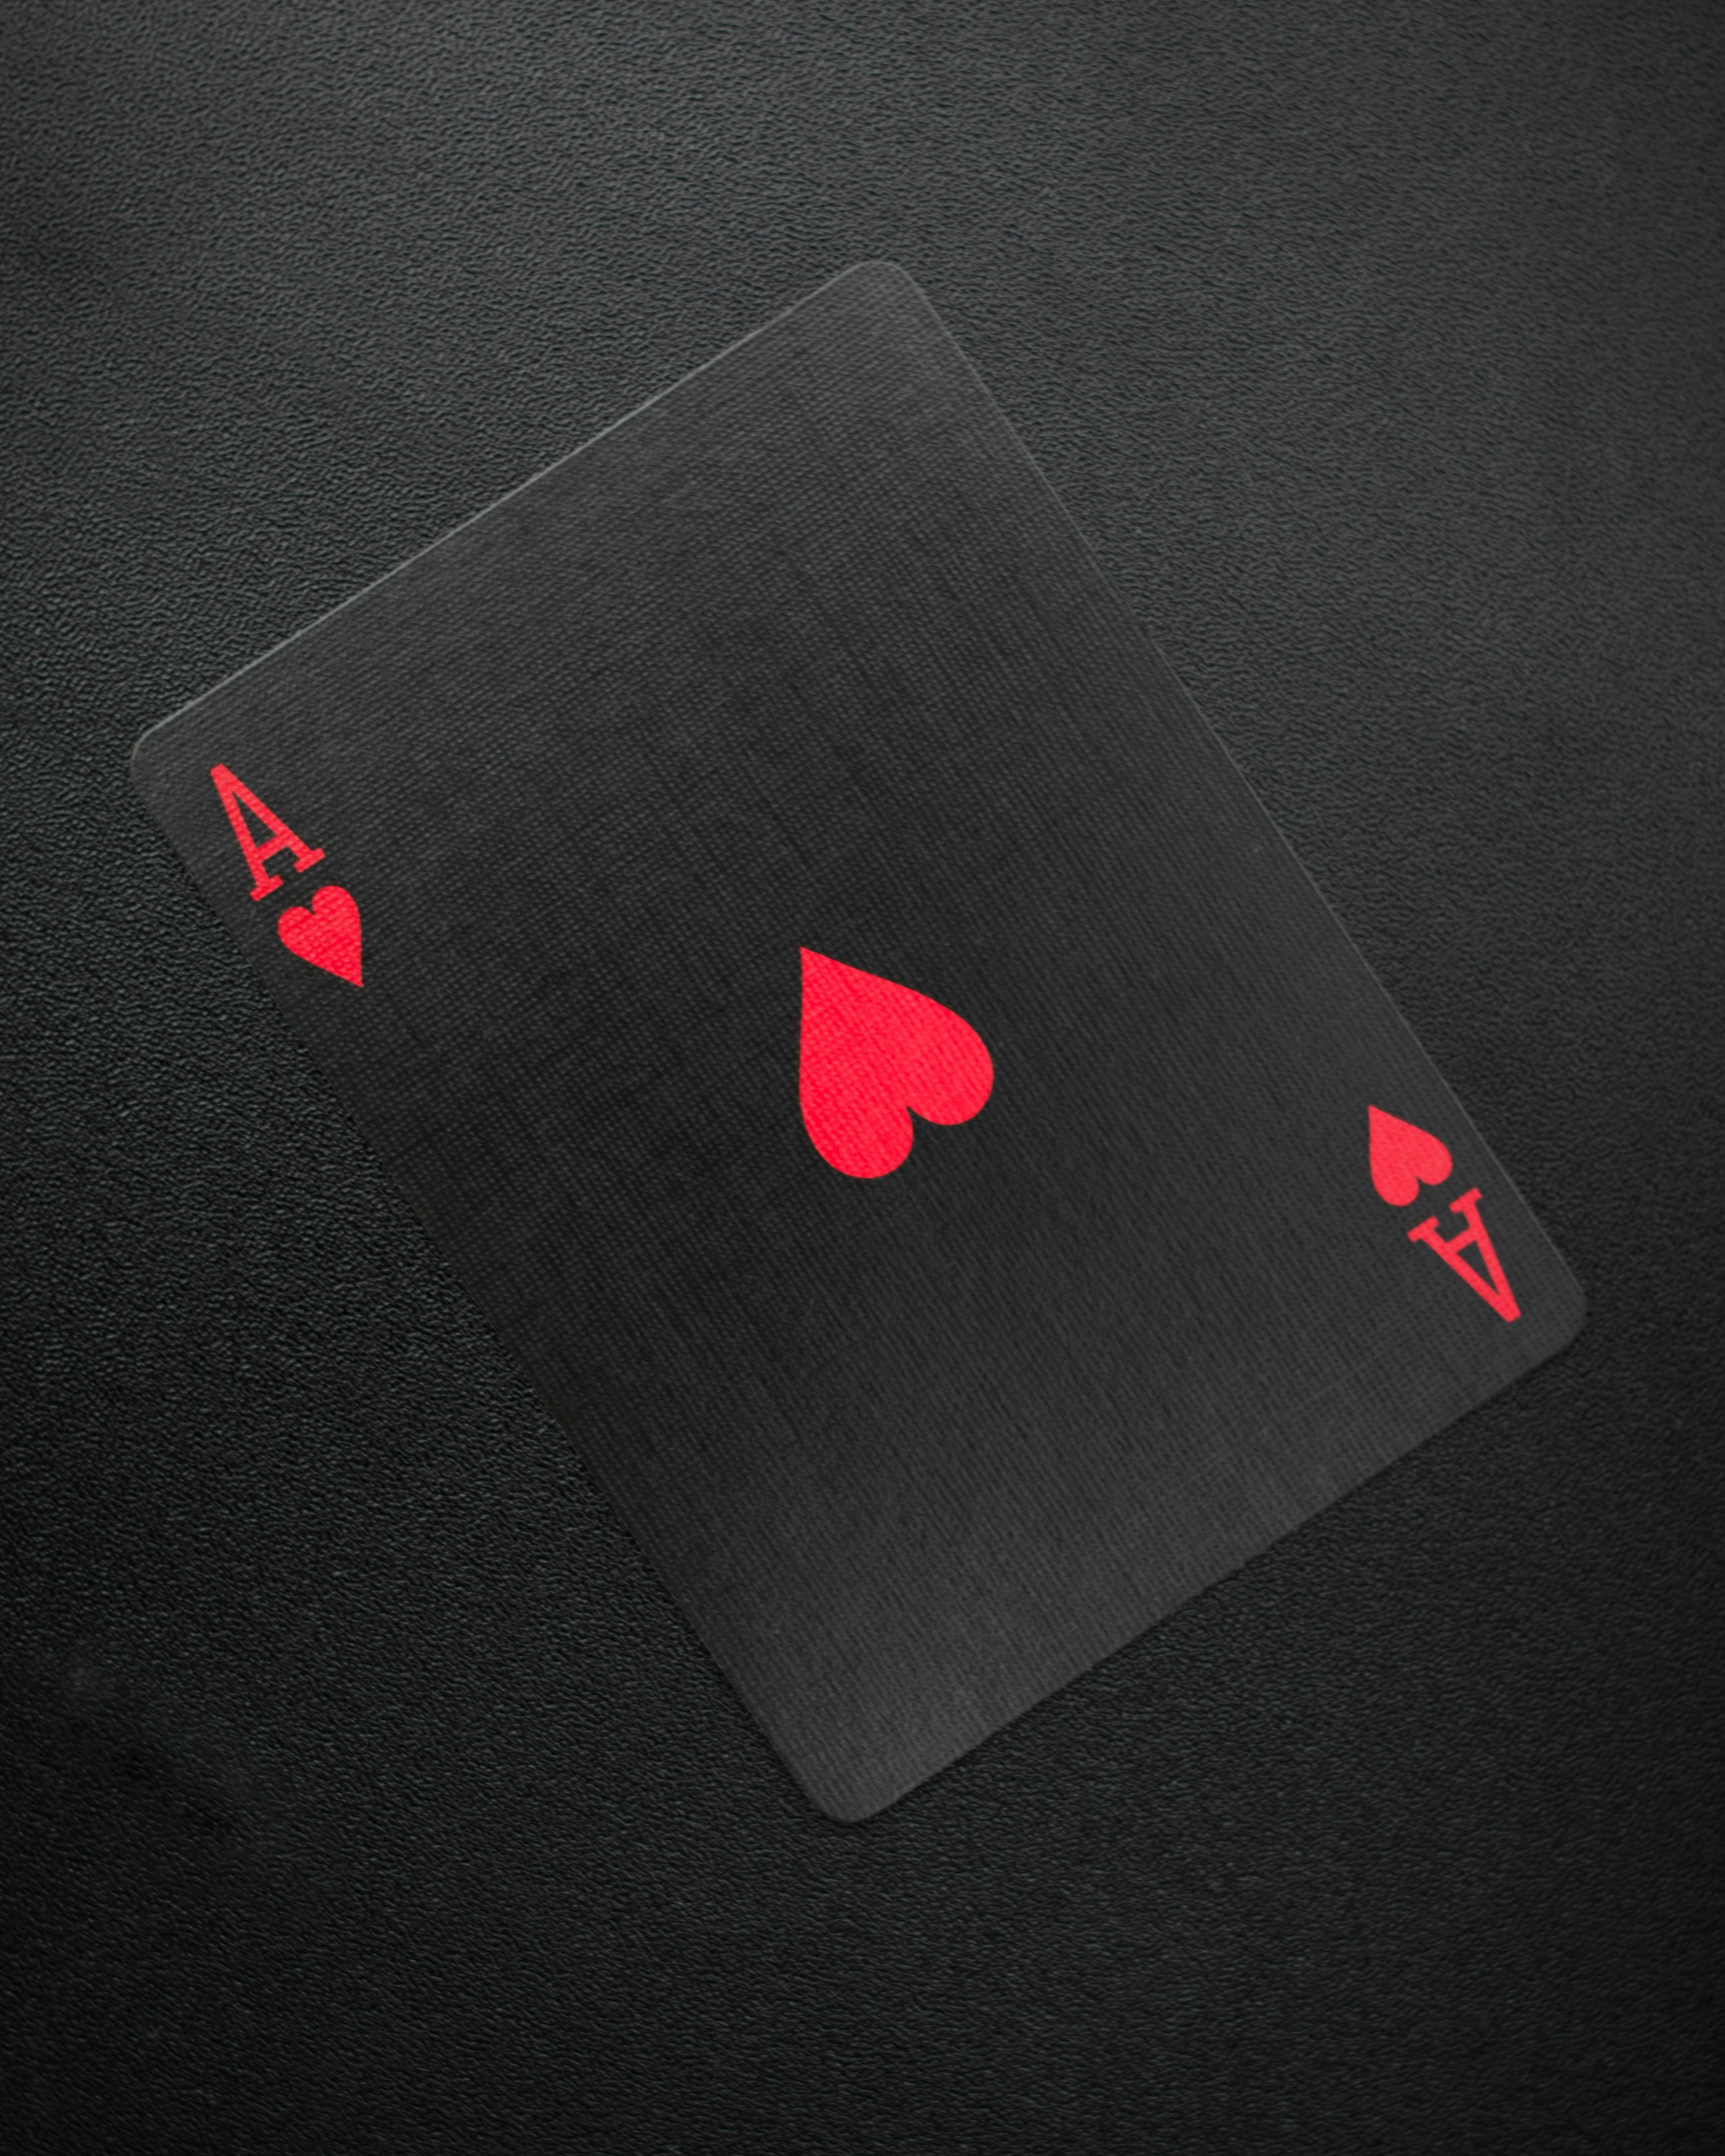 Ace of Hearts Card on Black Background · Free Stock Photo